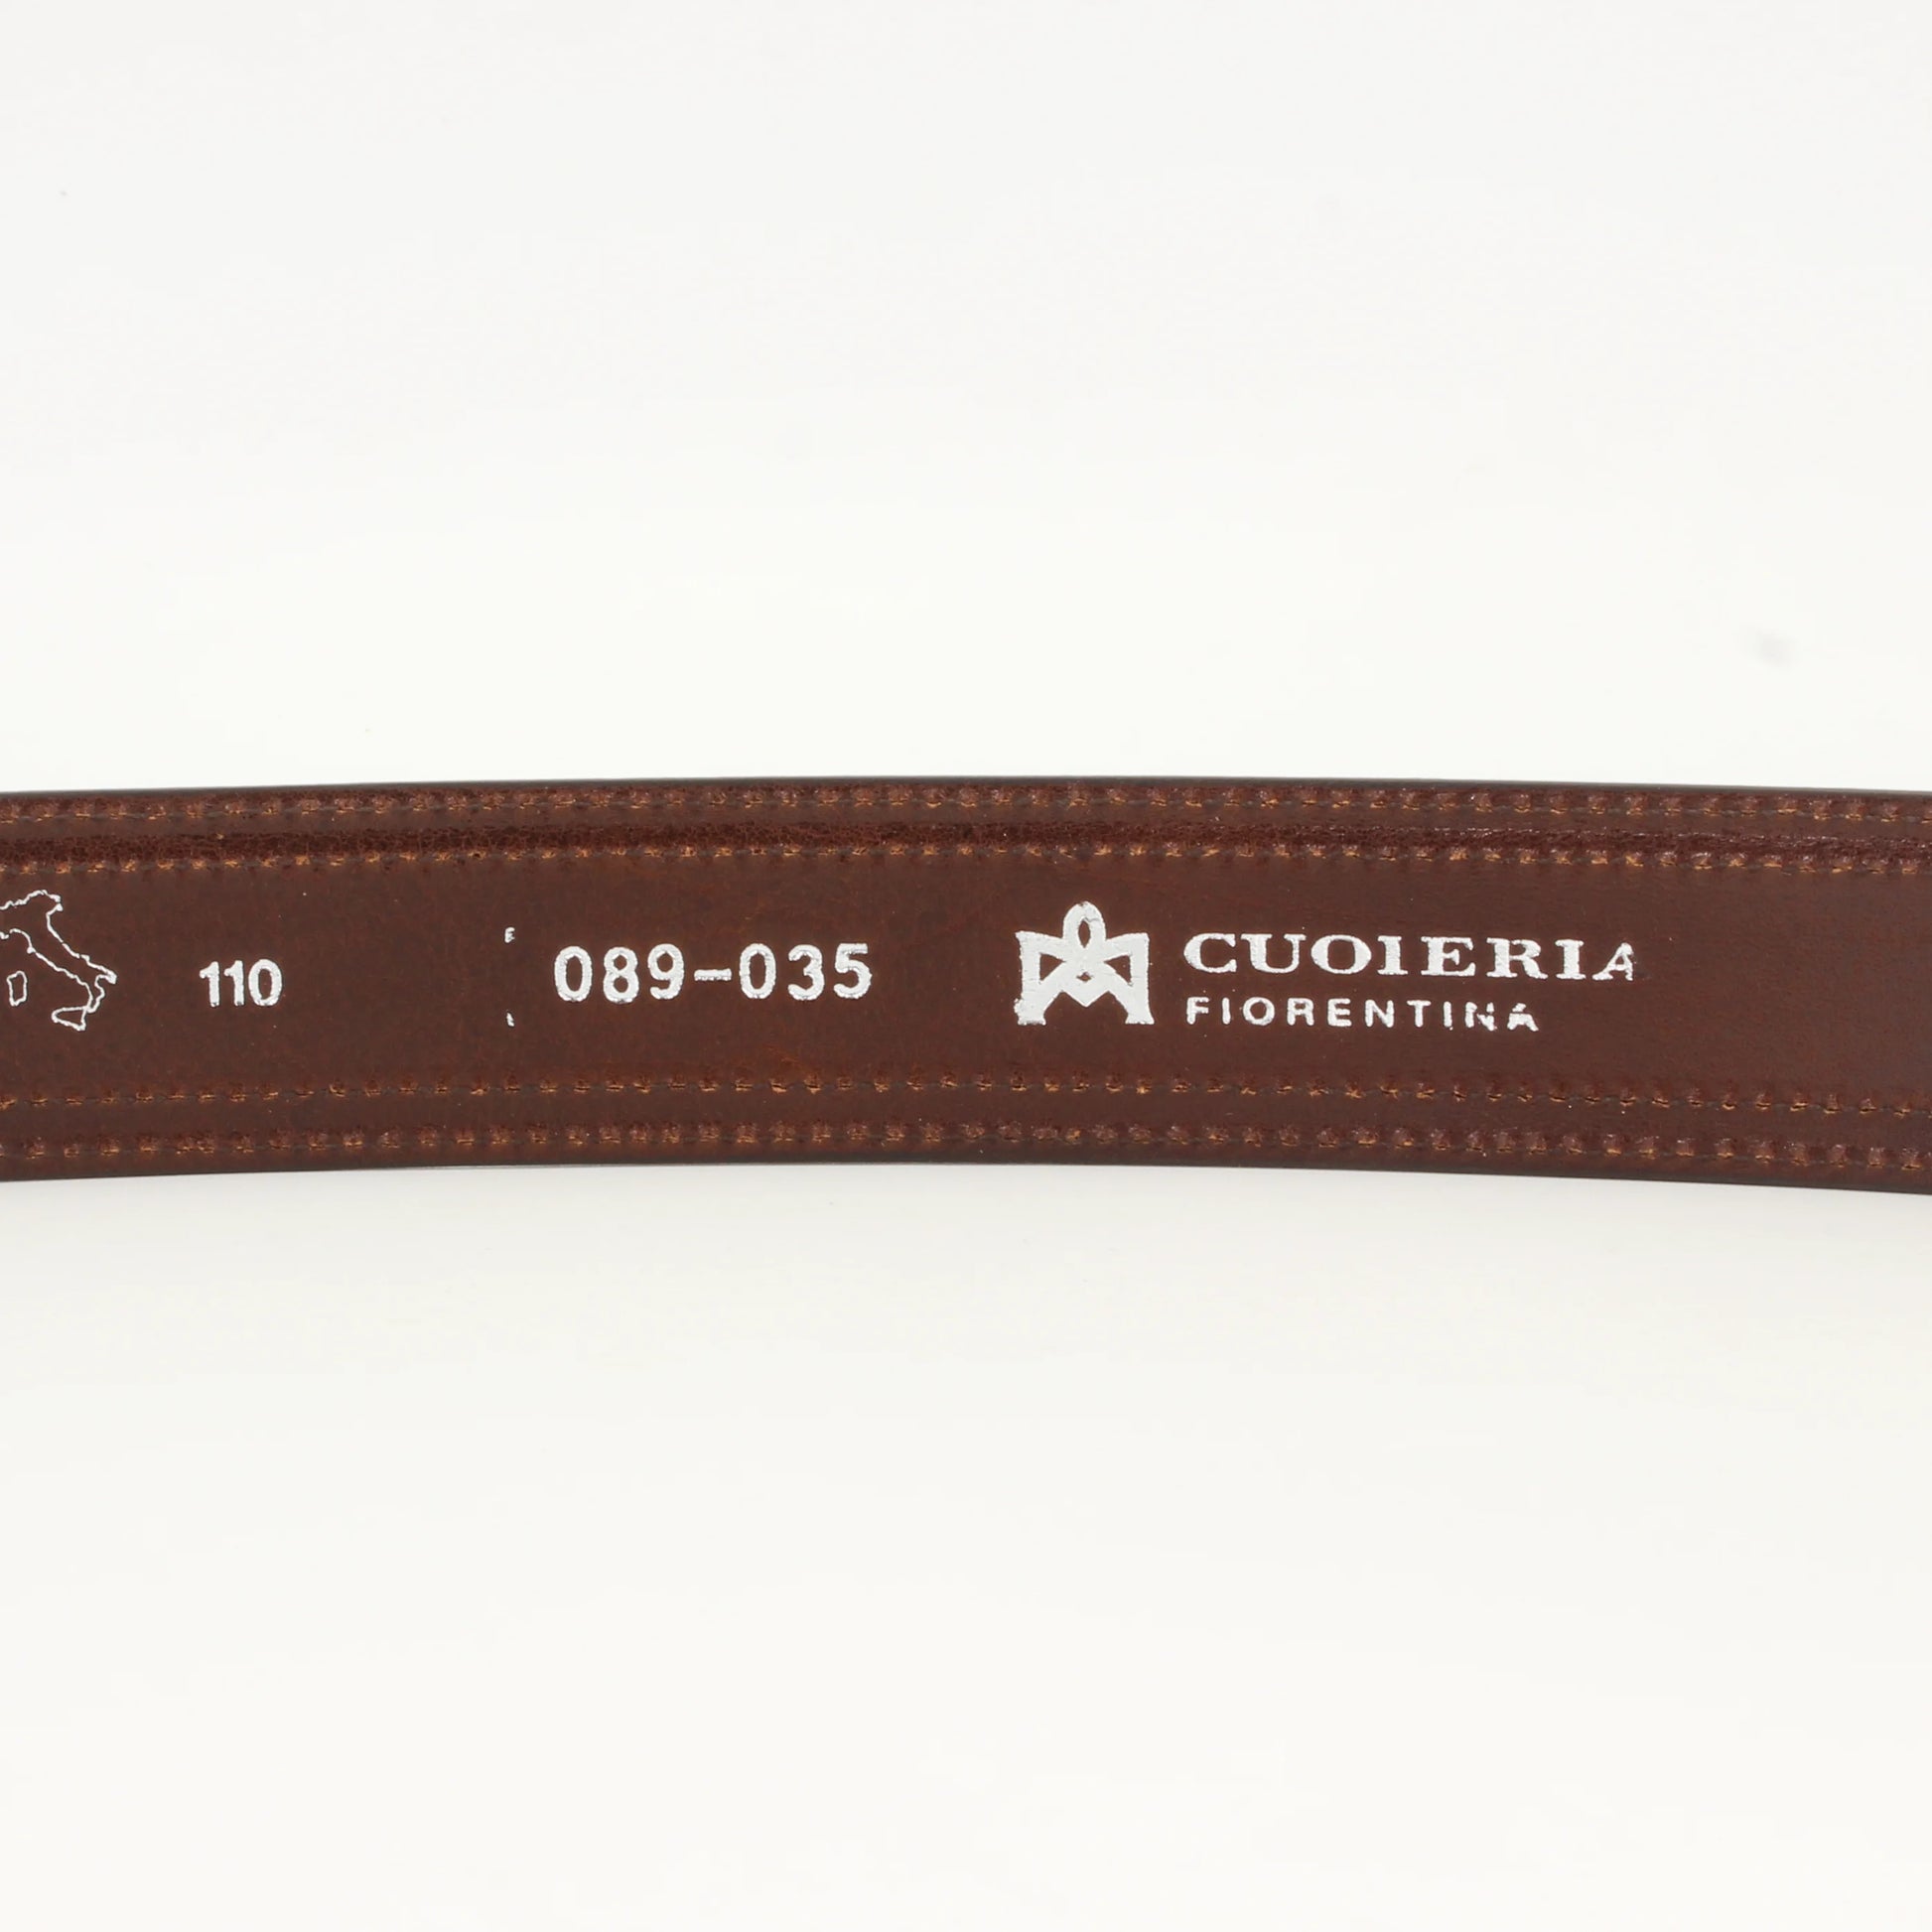 Shop our Italian-made Cuoieria Fiorentina double stitch leather belt in testa di moro (CI0DG0089G040) or browse our range of Italian belts for men & women in-store at Aliverti Cape Town, or shop online.   We deliver in South Africa & offer multiple payment plans as well as accept multiple safe & secure payment methods.